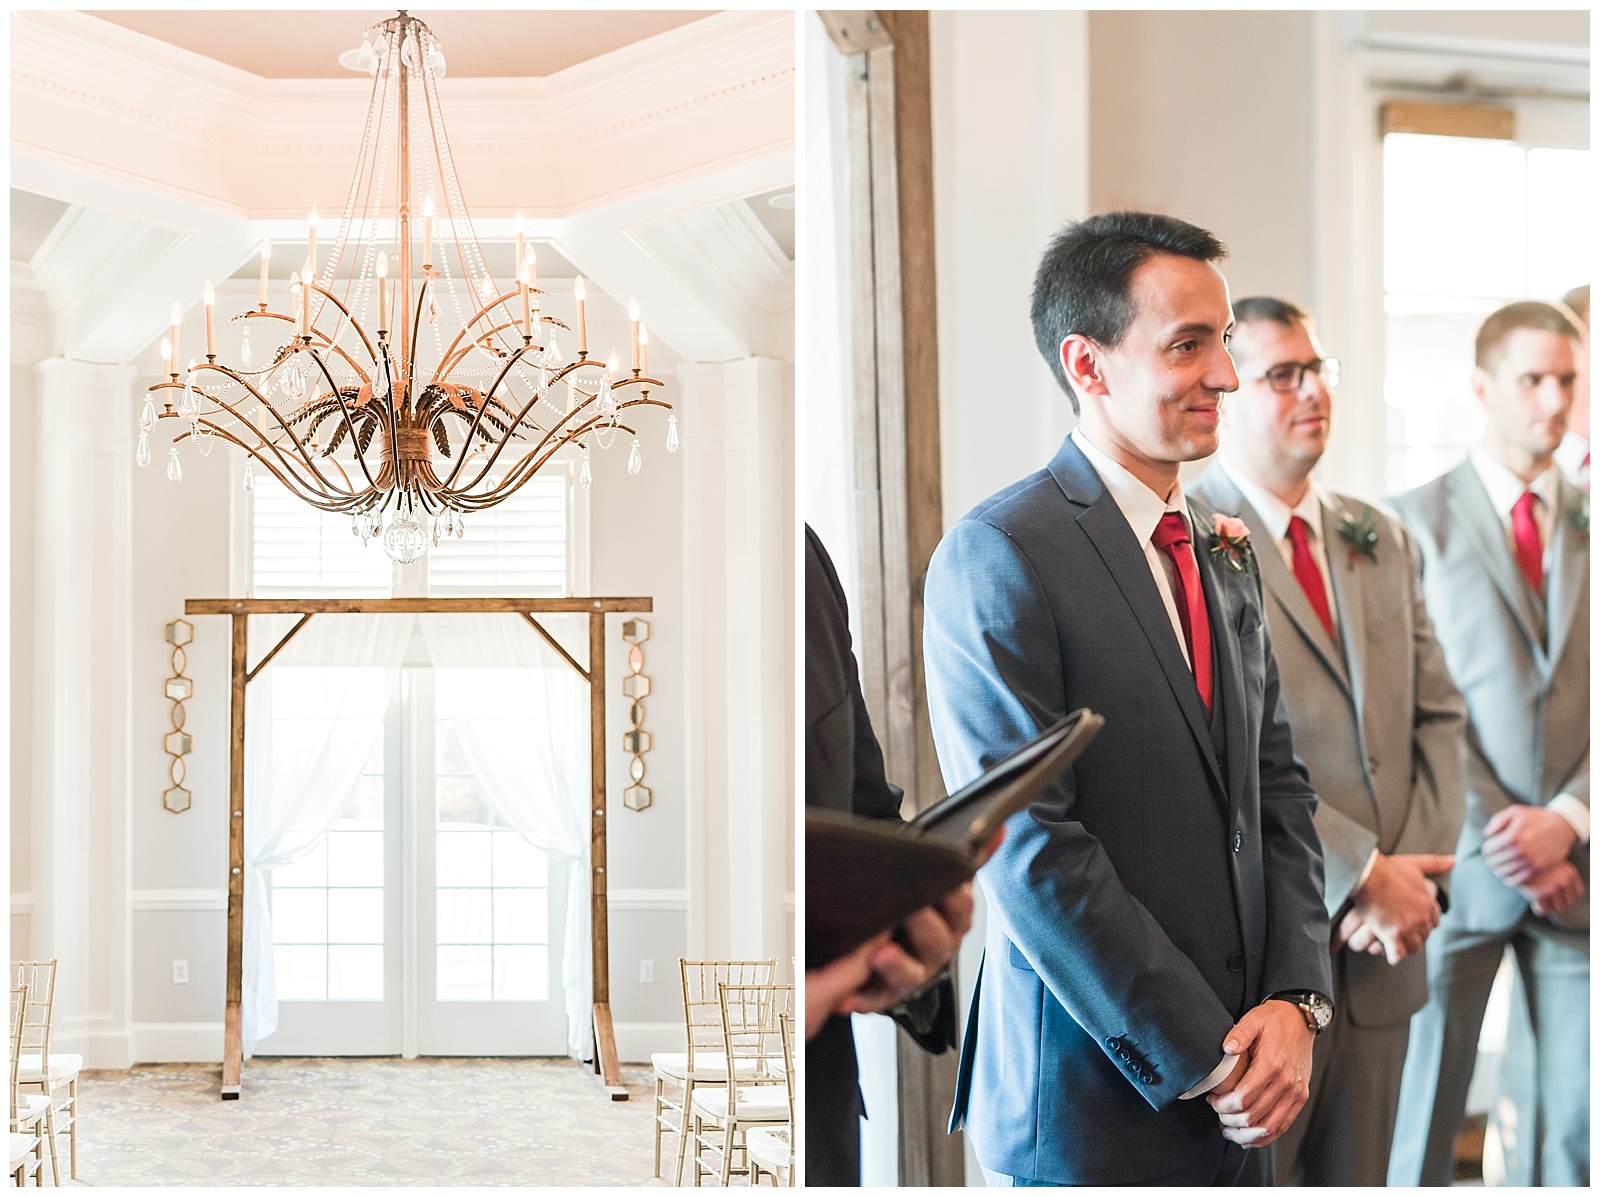 Tony + Tyler Wedding at Independence Golf Club by the tuckers photography